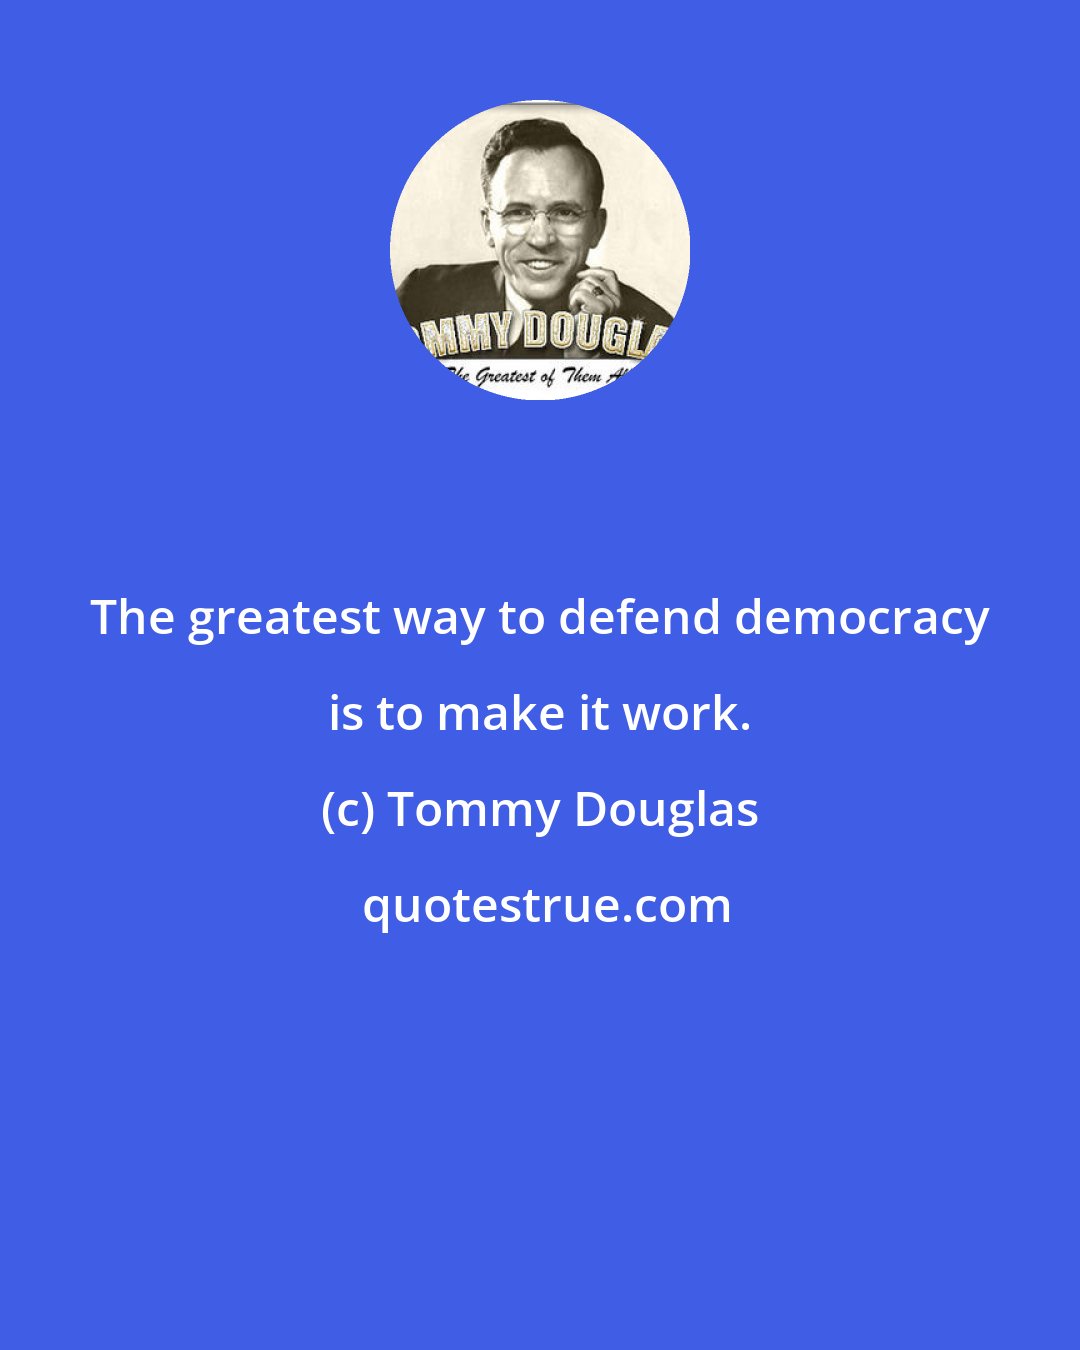 Tommy Douglas: The greatest way to defend democracy is to make it work.